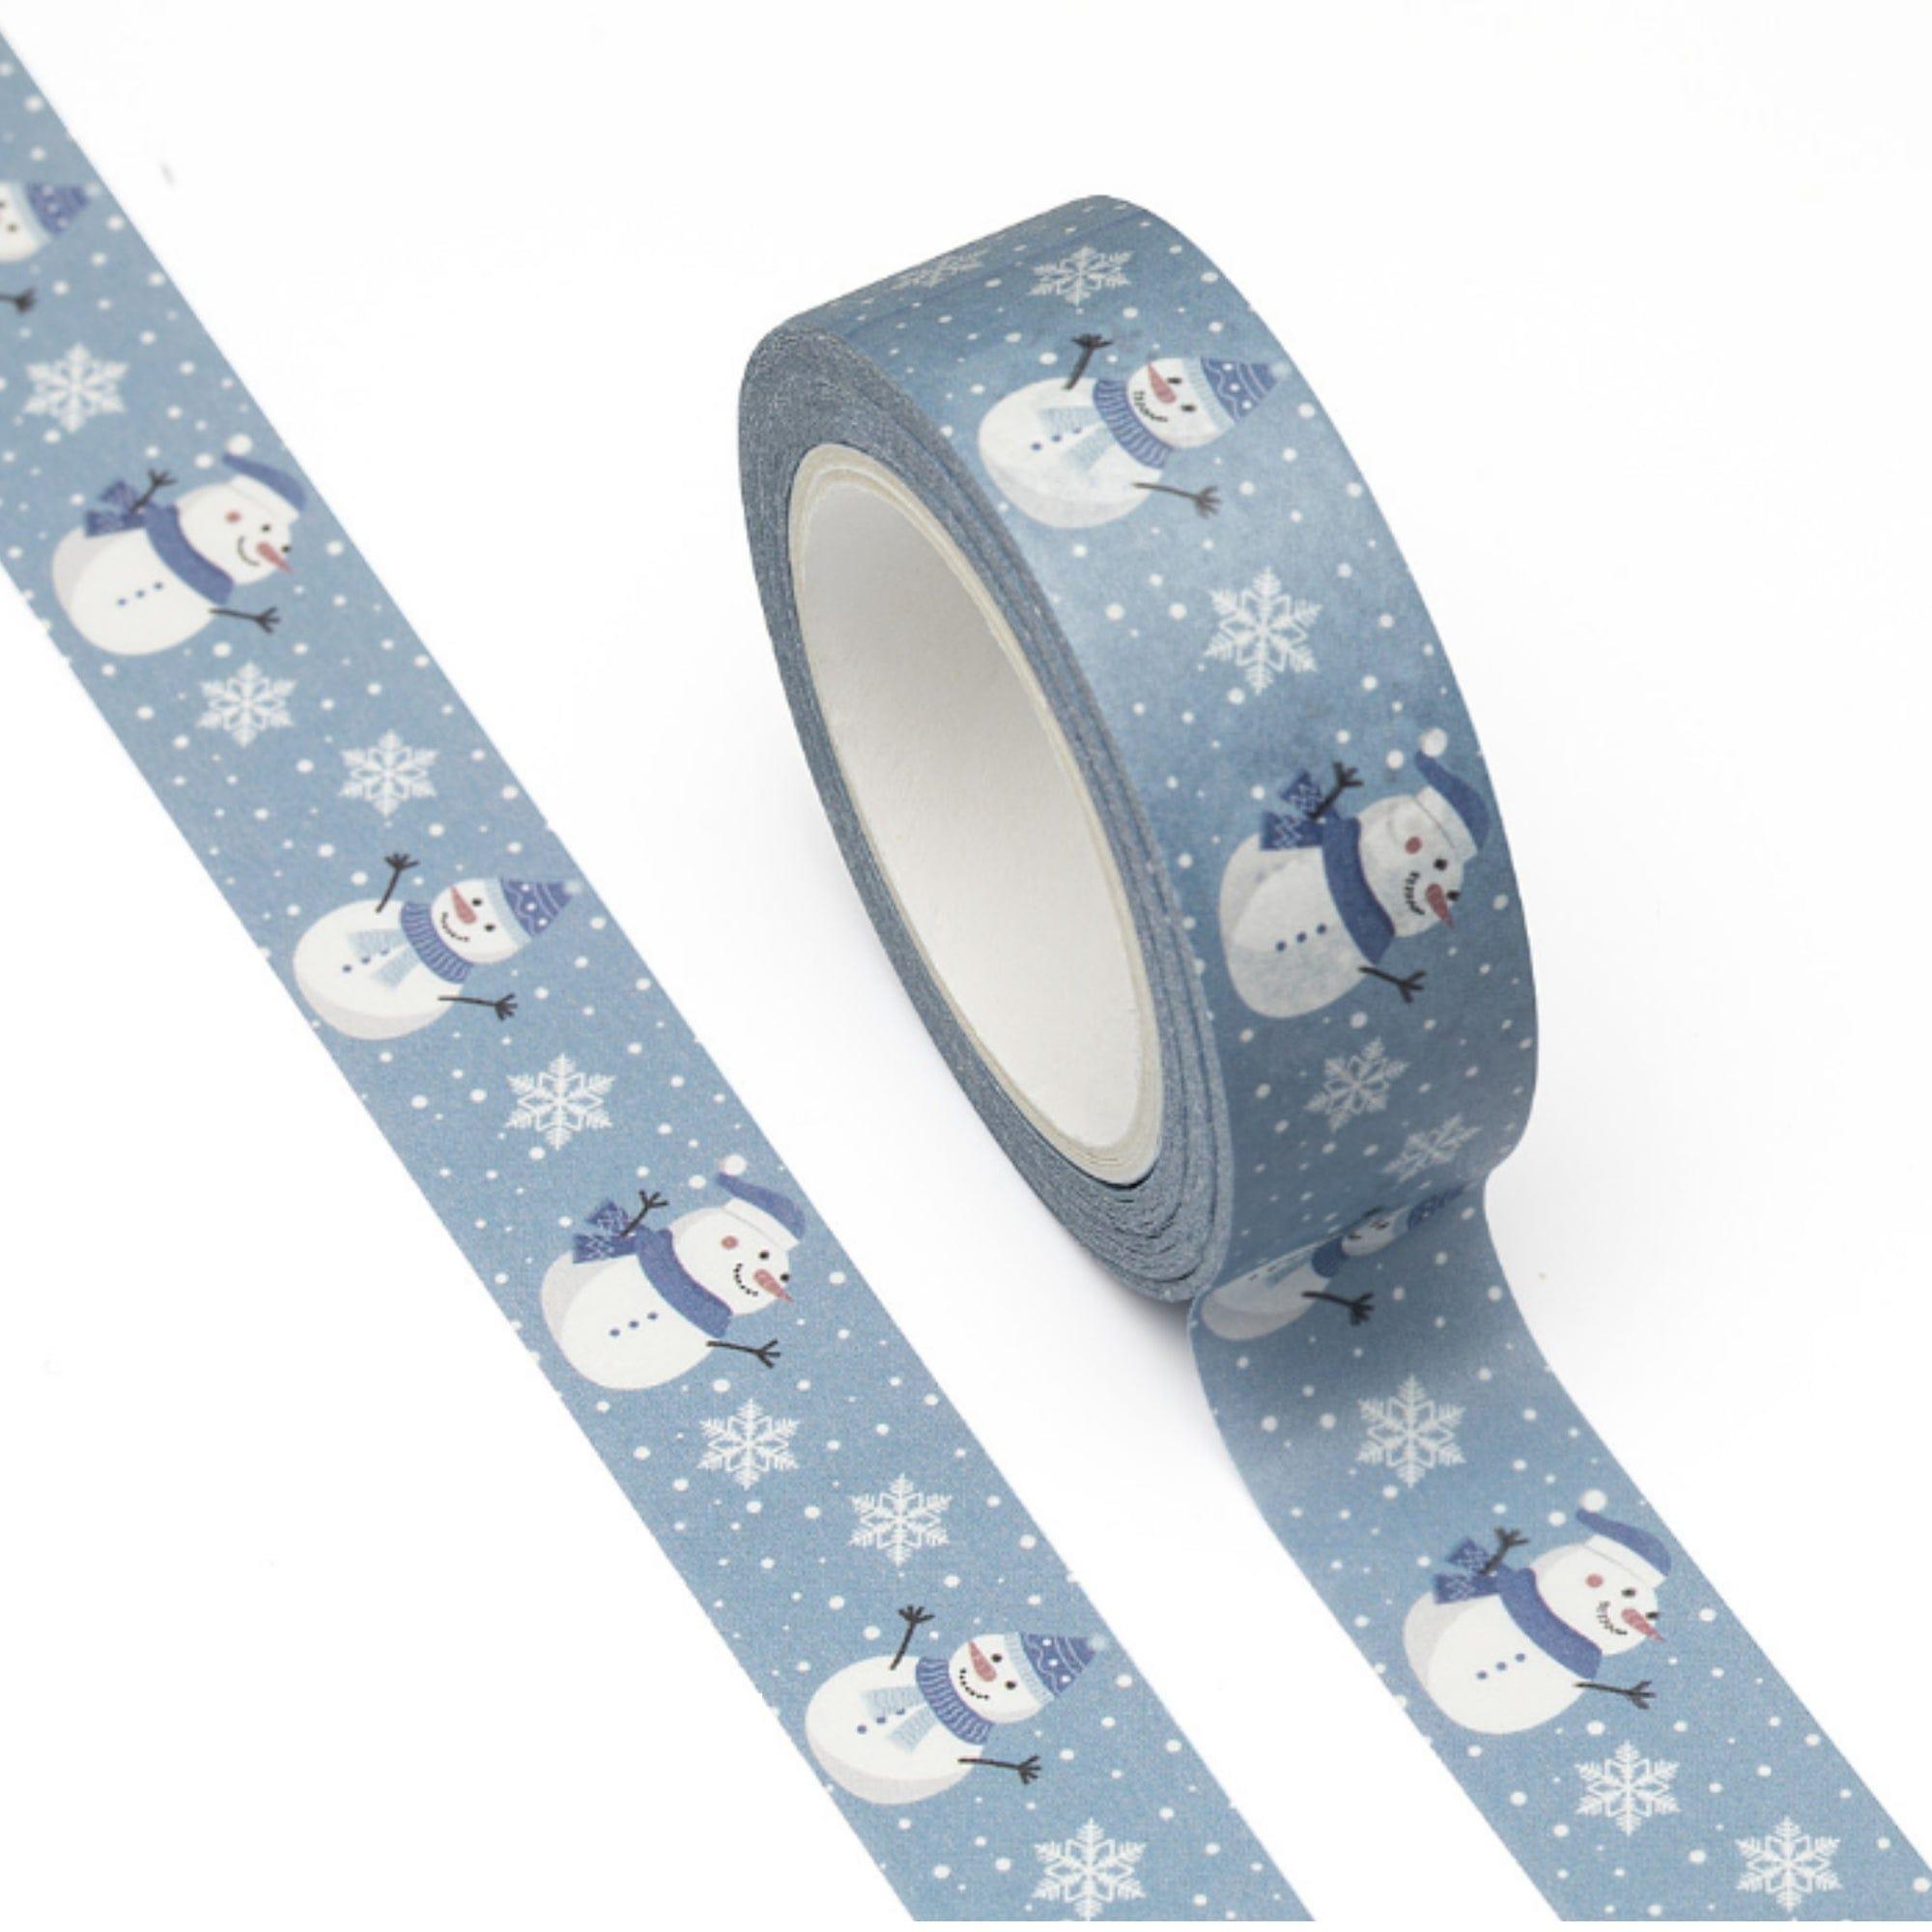 TW Collection Snowman & Snowflakes Washi Tape by SSC Designs - 15mm x 30 Feet - Scrapbook Supply Companies